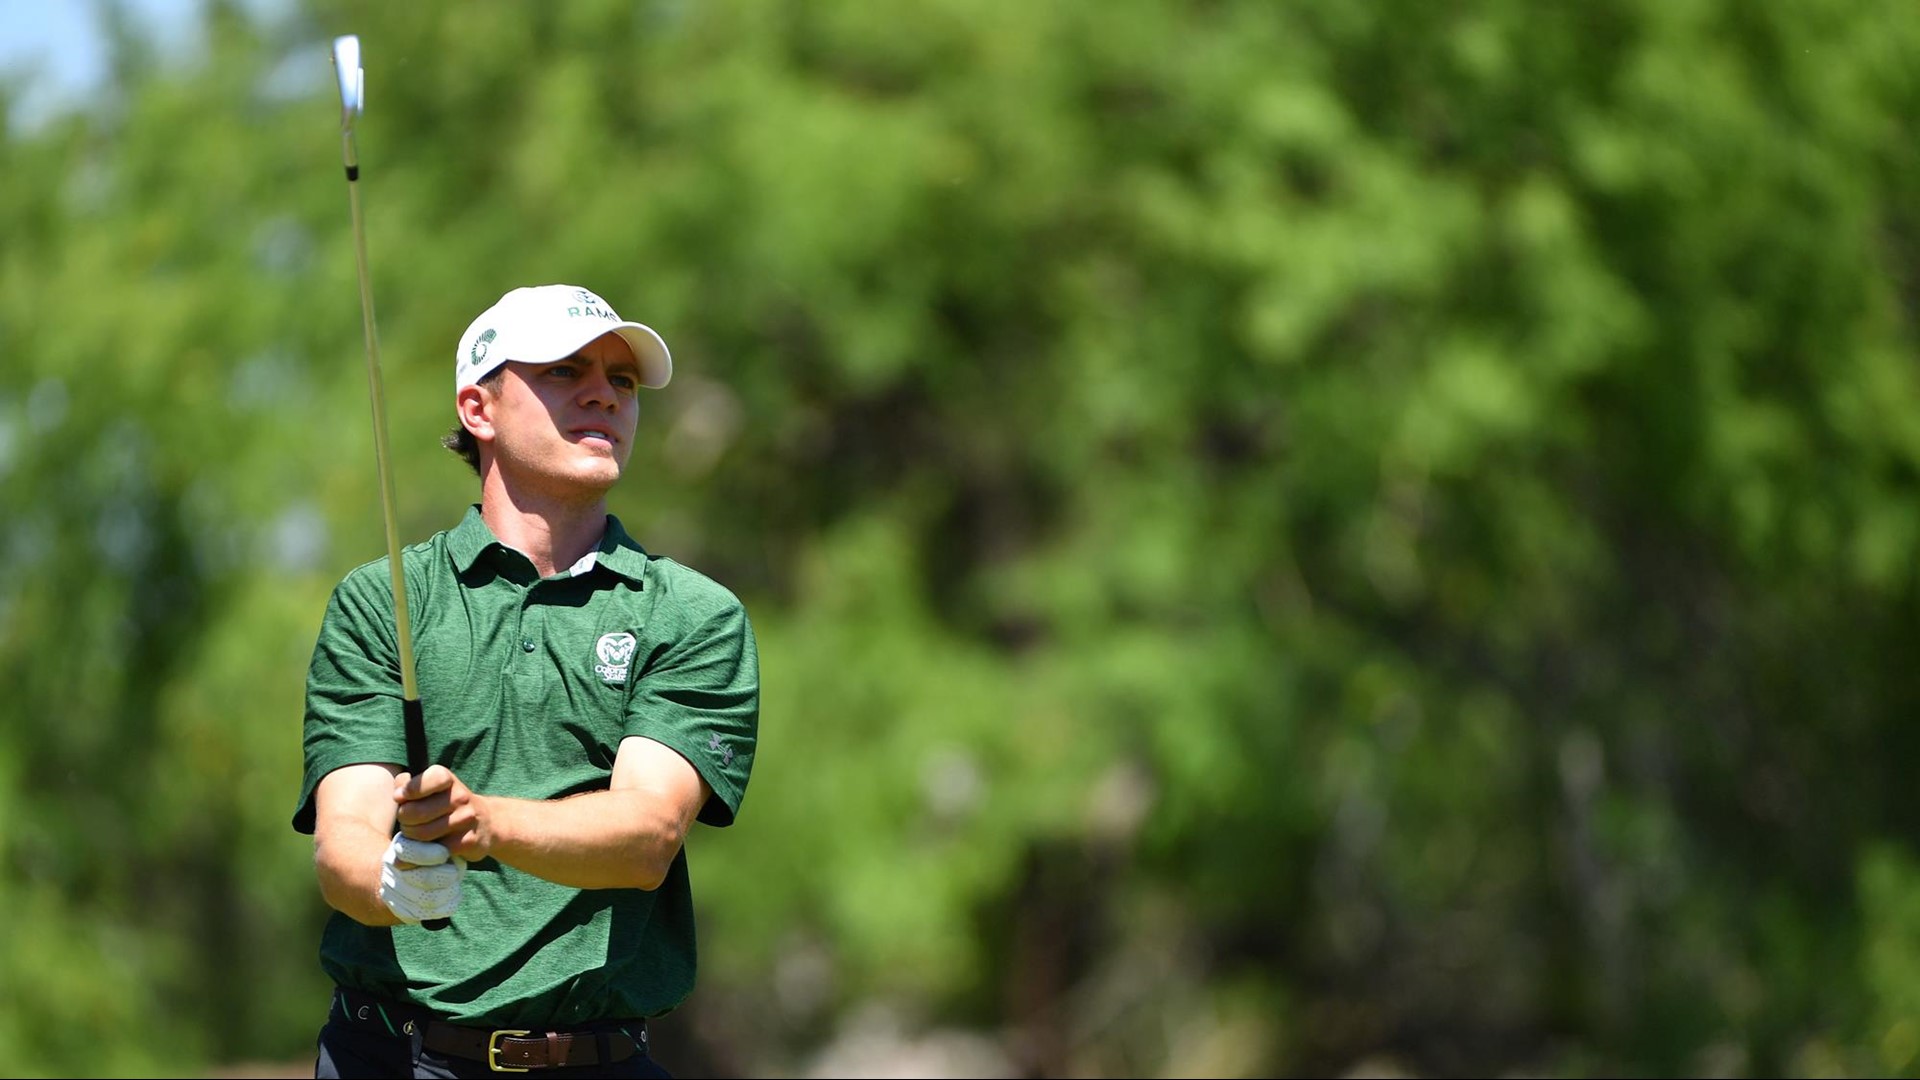 AJ Ott qualified for the NCAA regional tournament in Stillwater, OK as an individual golfer. The CSU senior must finish first to advance to nationals.